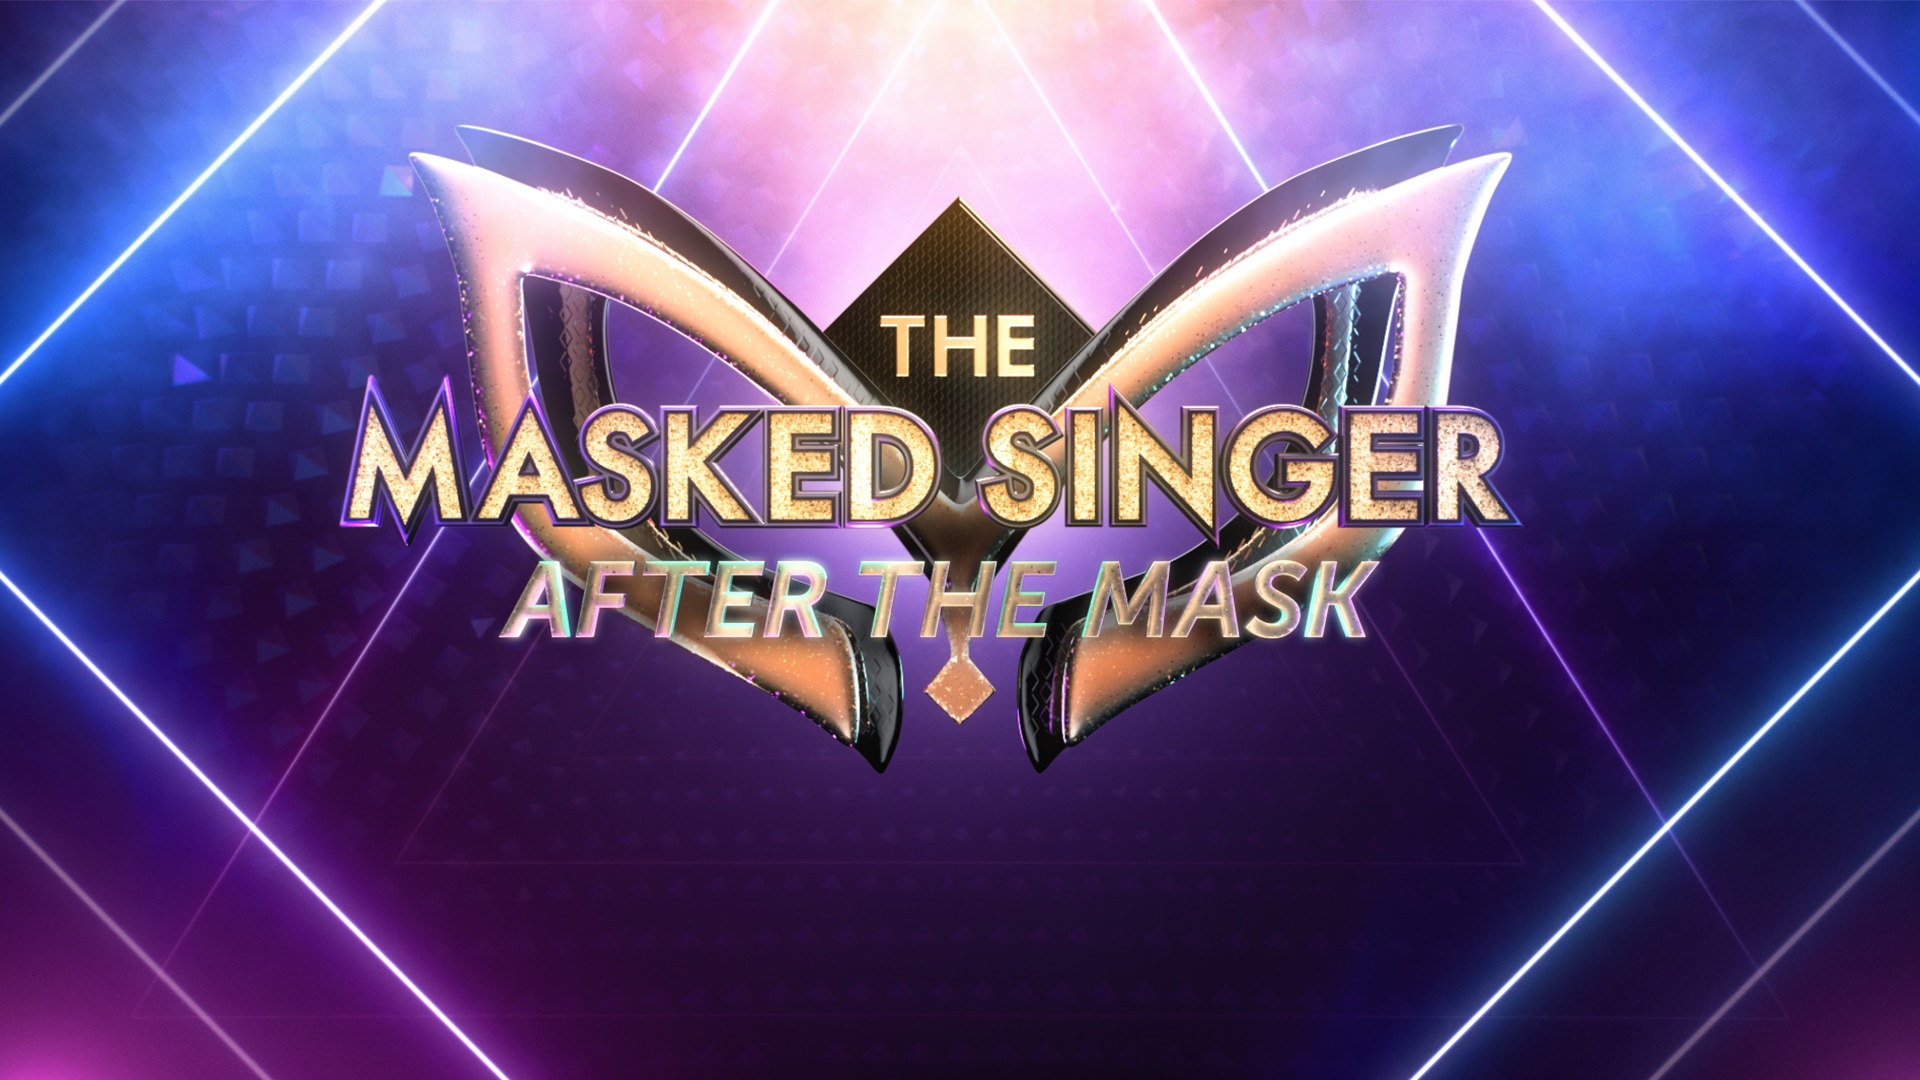 at donere En trofast Squeak Watch The Masked Singer: Season 3, Episode 14, "After the Mask: The Mother  of All Final Face Offs, Part 2" Online - FOX